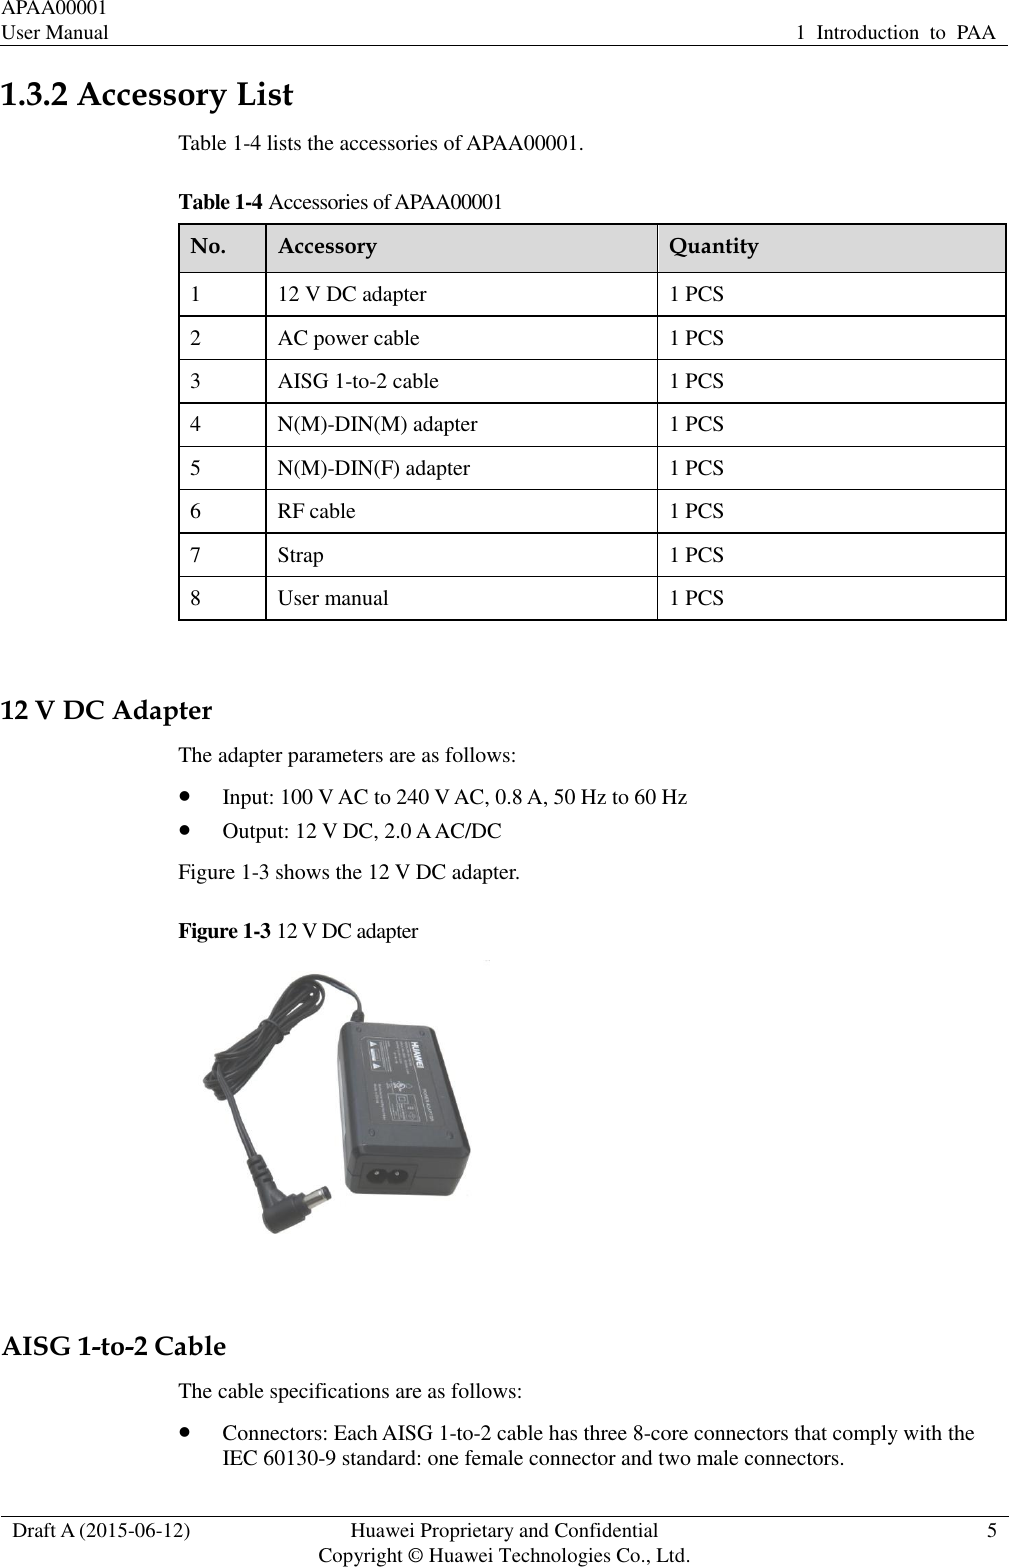 APAA00001 User Manual 1  Introduction  to  PAA  Draft A (2015-06-12) Huawei Proprietary and Confidential           Copyright © Huawei Technologies Co., Ltd. 5  1.3.2 Accessory List Table 1-4 lists the accessories of APAA00001.   Table 1-4 Accessories of APAA00001 No. Accessory Quantity 1 12 V DC adapter 1 PCS 2 AC power cable 1 PCS 3 AISG 1-to-2 cable 1 PCS 4 N(M)-DIN(M) adapter 1 PCS 5 N(M)-DIN(F) adapter 1 PCS 6 RF cable 1 PCS 7 Strap 1 PCS 8 User manual 1 PCS  12 V DC Adapter The adapter parameters are as follows:  Input: 100 V AC to 240 V AC, 0.8 A, 50 Hz to 60 Hz  Output: 12 V DC, 2.0 A AC/DC Figure 1-3 shows the 12 V DC adapter. Figure 1-3 12 V DC adapter   AISG 1-to-2 Cable The cable specifications are as follows:  Connectors: Each AISG 1-to-2 cable has three 8-core connectors that comply with the IEC 60130-9 standard: one female connector and two male connectors. 